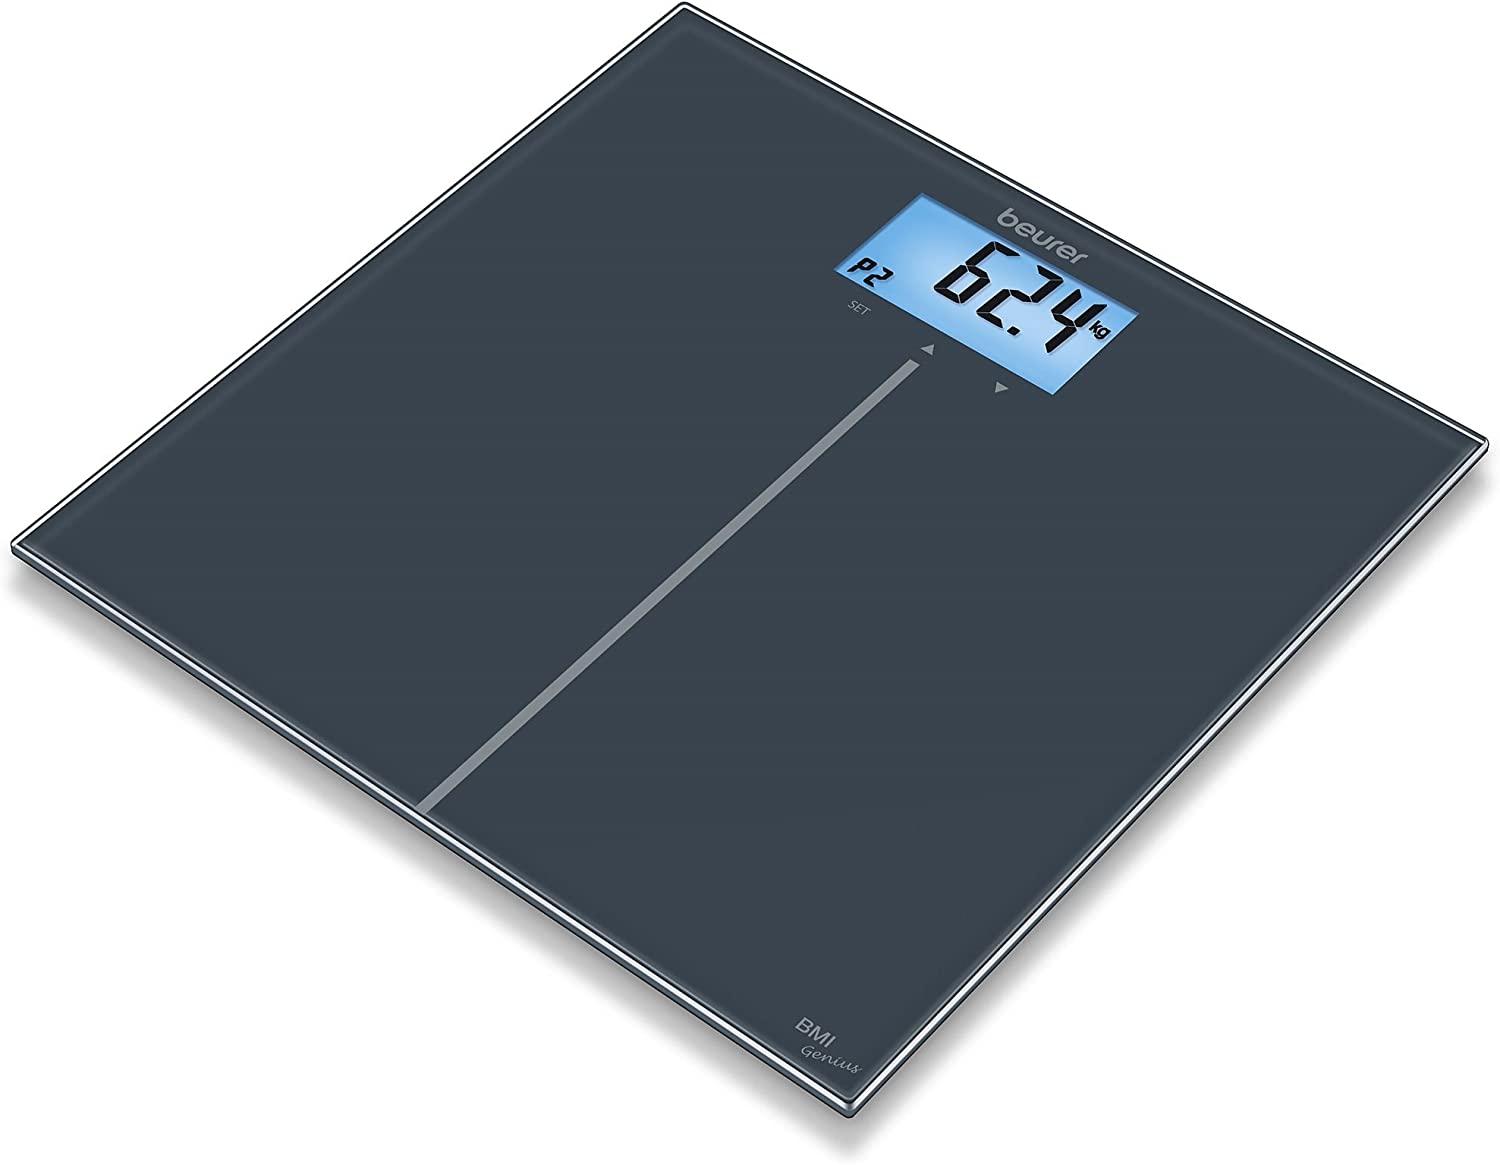 Beurer GS 280 BMI Genius Glass Scales Digital Personal Scales with Interpretation of BMI through Coloured Display